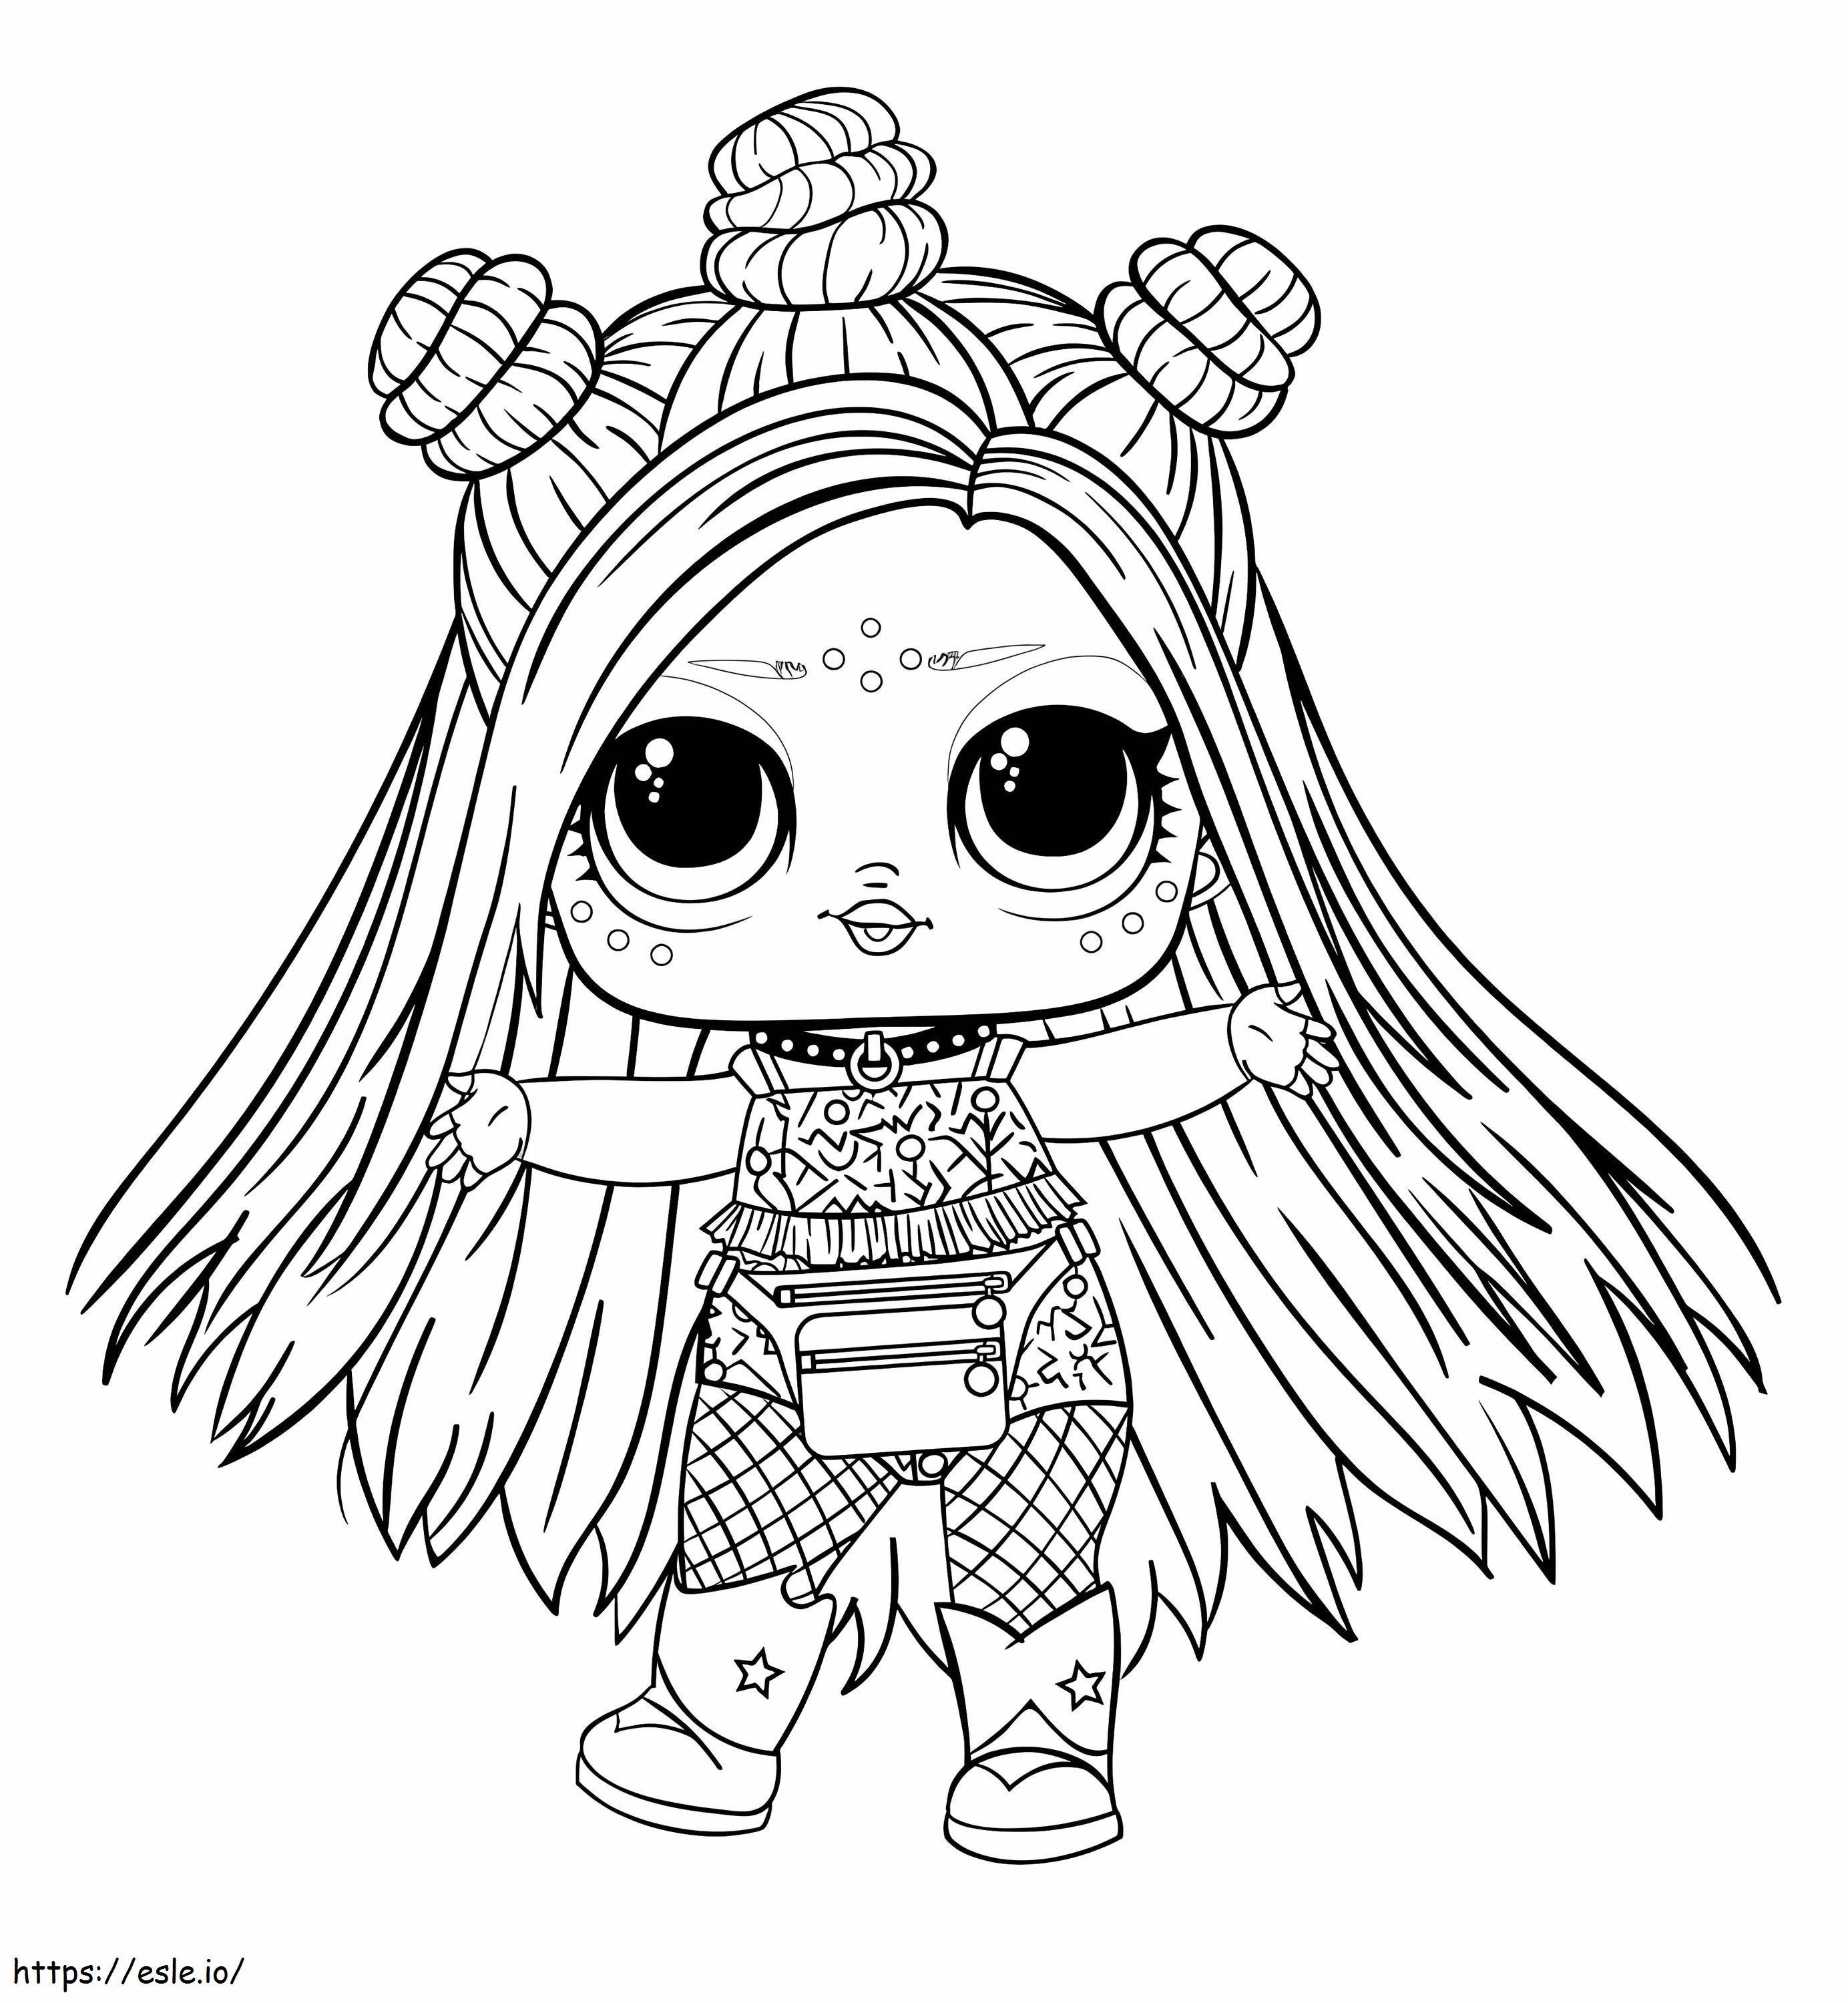 LOL Surprise Doll coloring page